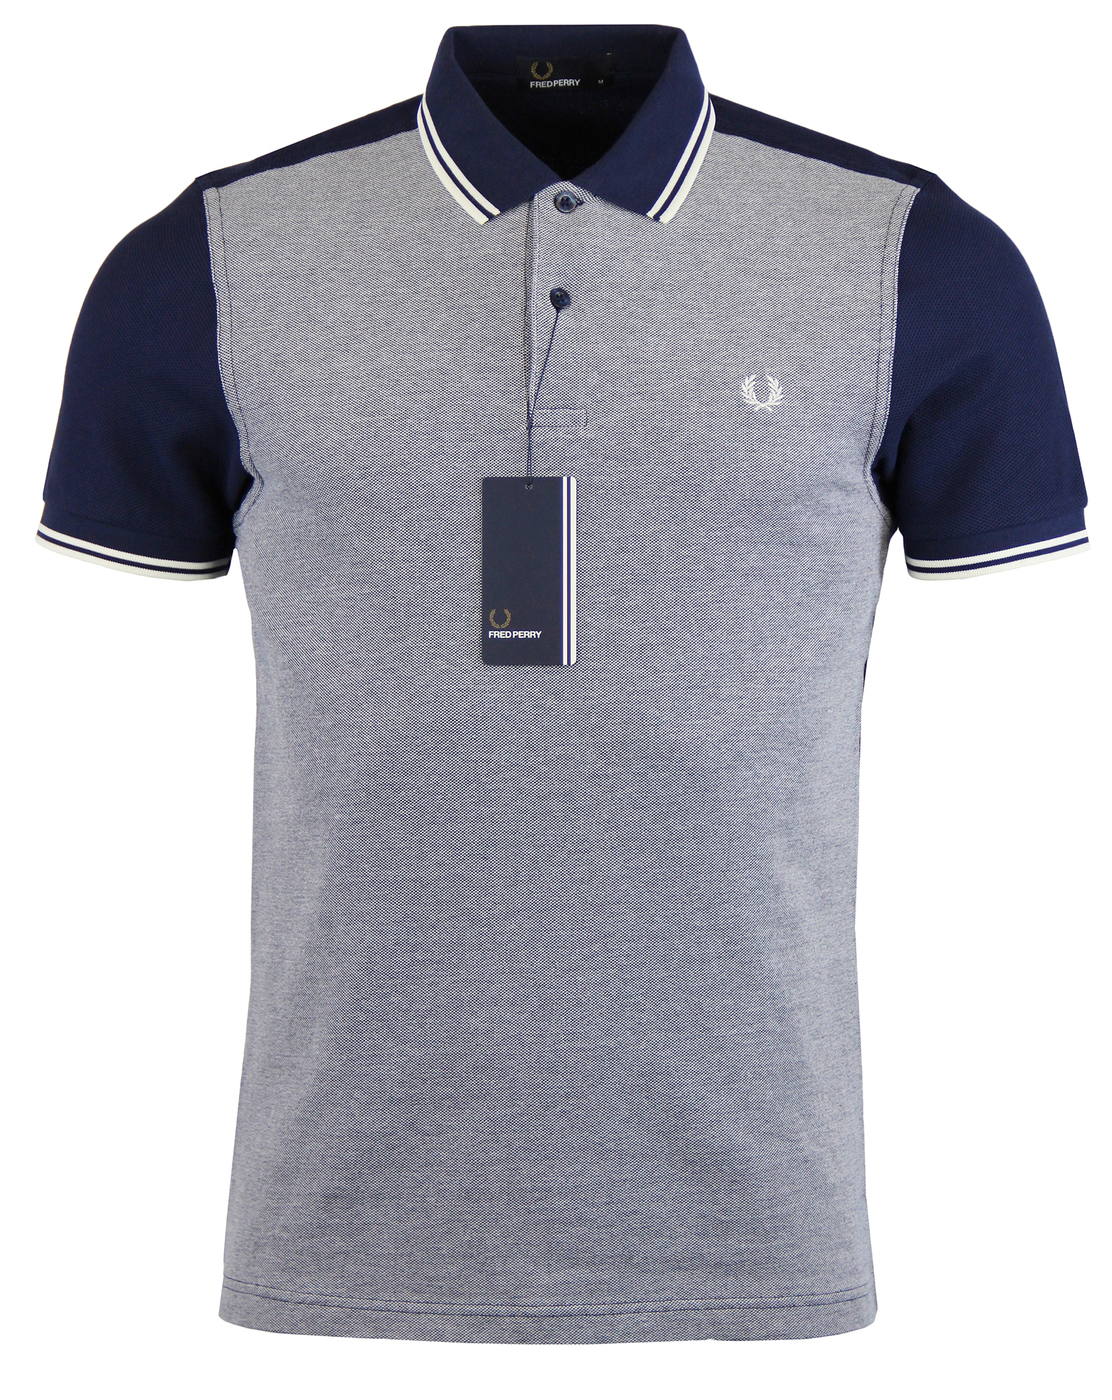 FRED PERRY Retro Mod Textured Polo Shirt